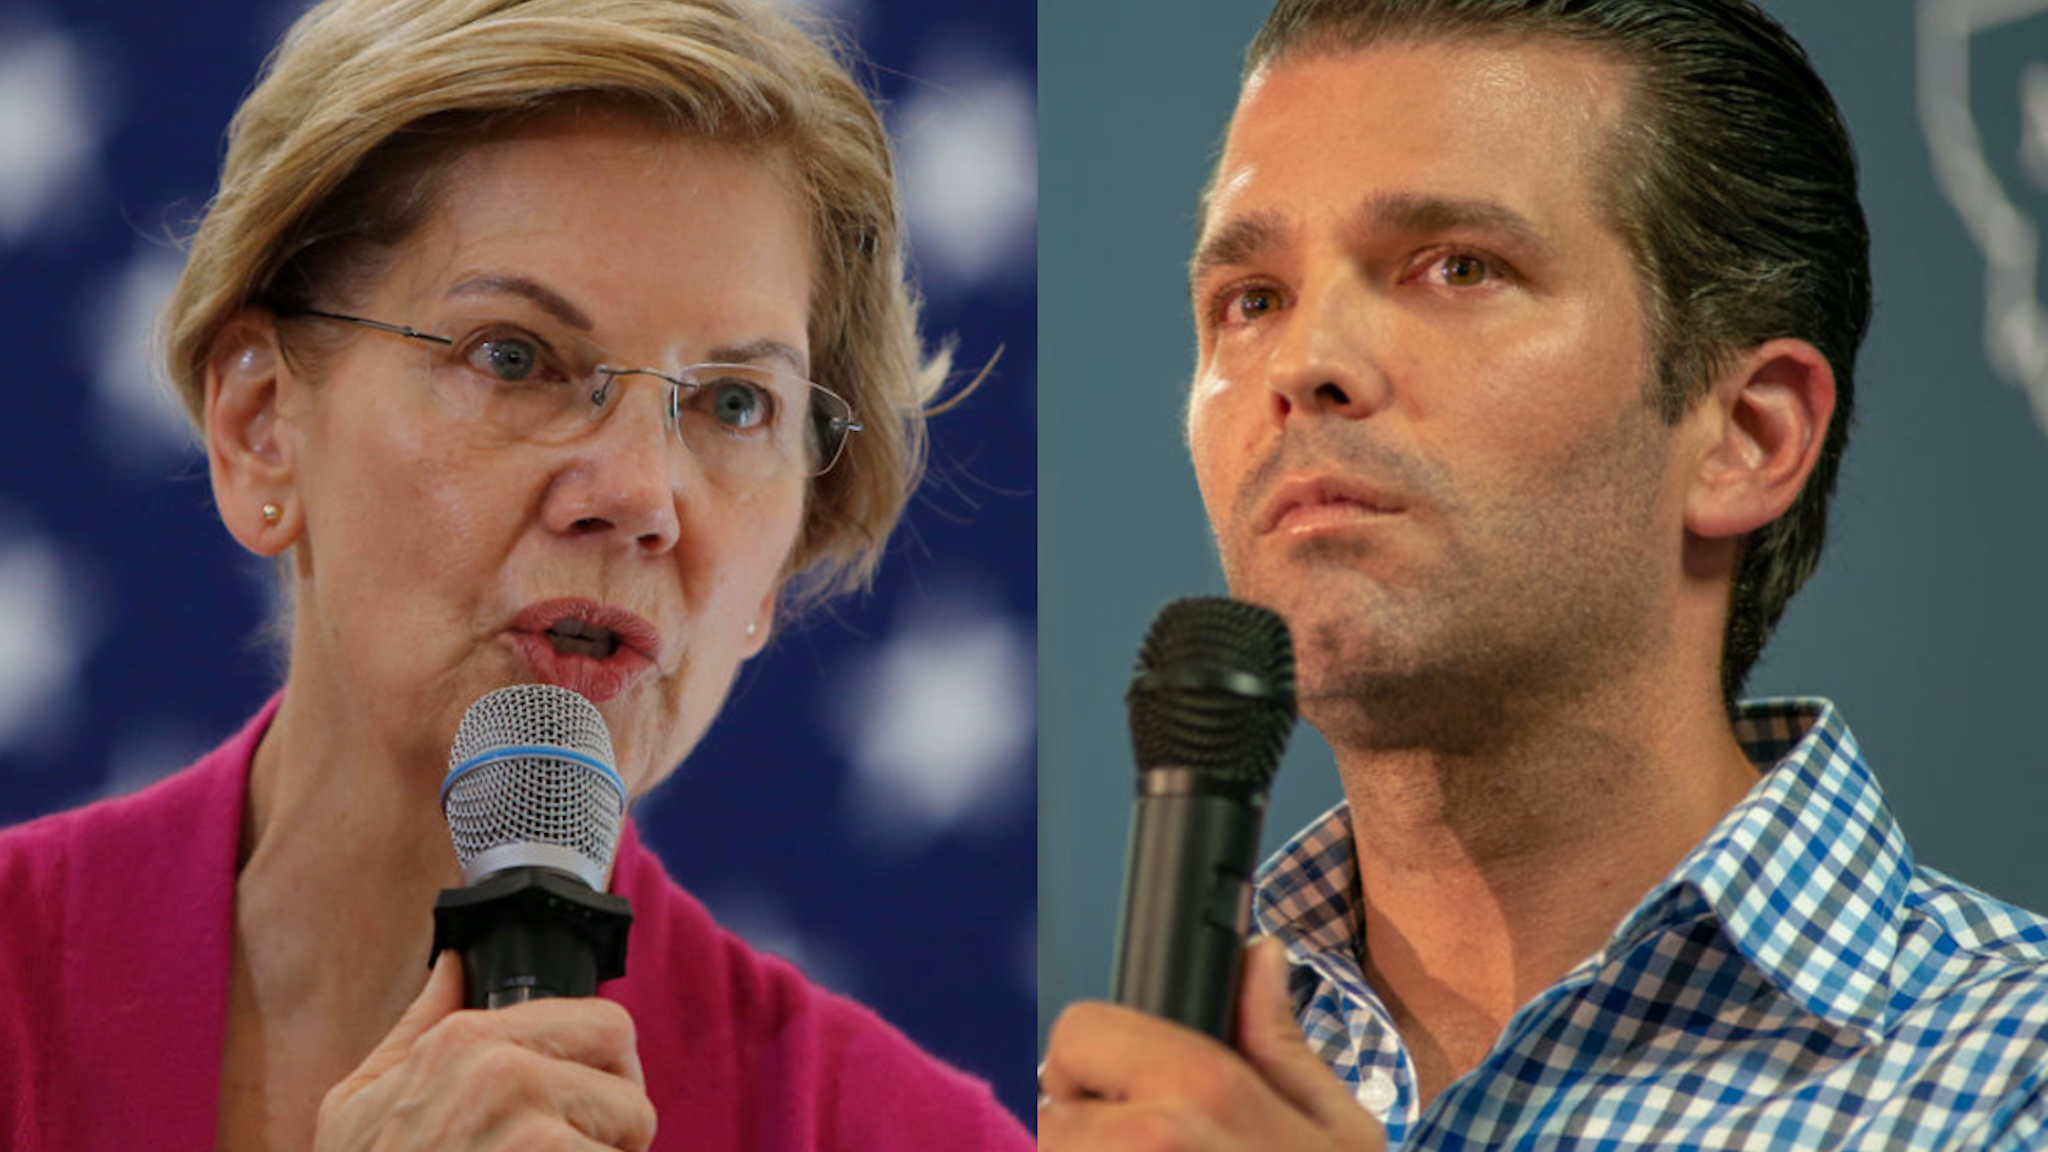 U.S. Senator and presidential candidate Elizabeth Warren speaks during a town hall at the University of New Hampshire in Durham, NH on Oct. 30, 2019.//Donald Trump Jr. speaks at a campaign rally in support Montana Senate candidate Matt Rosendale in Bozeman, MT on September 25,2018.